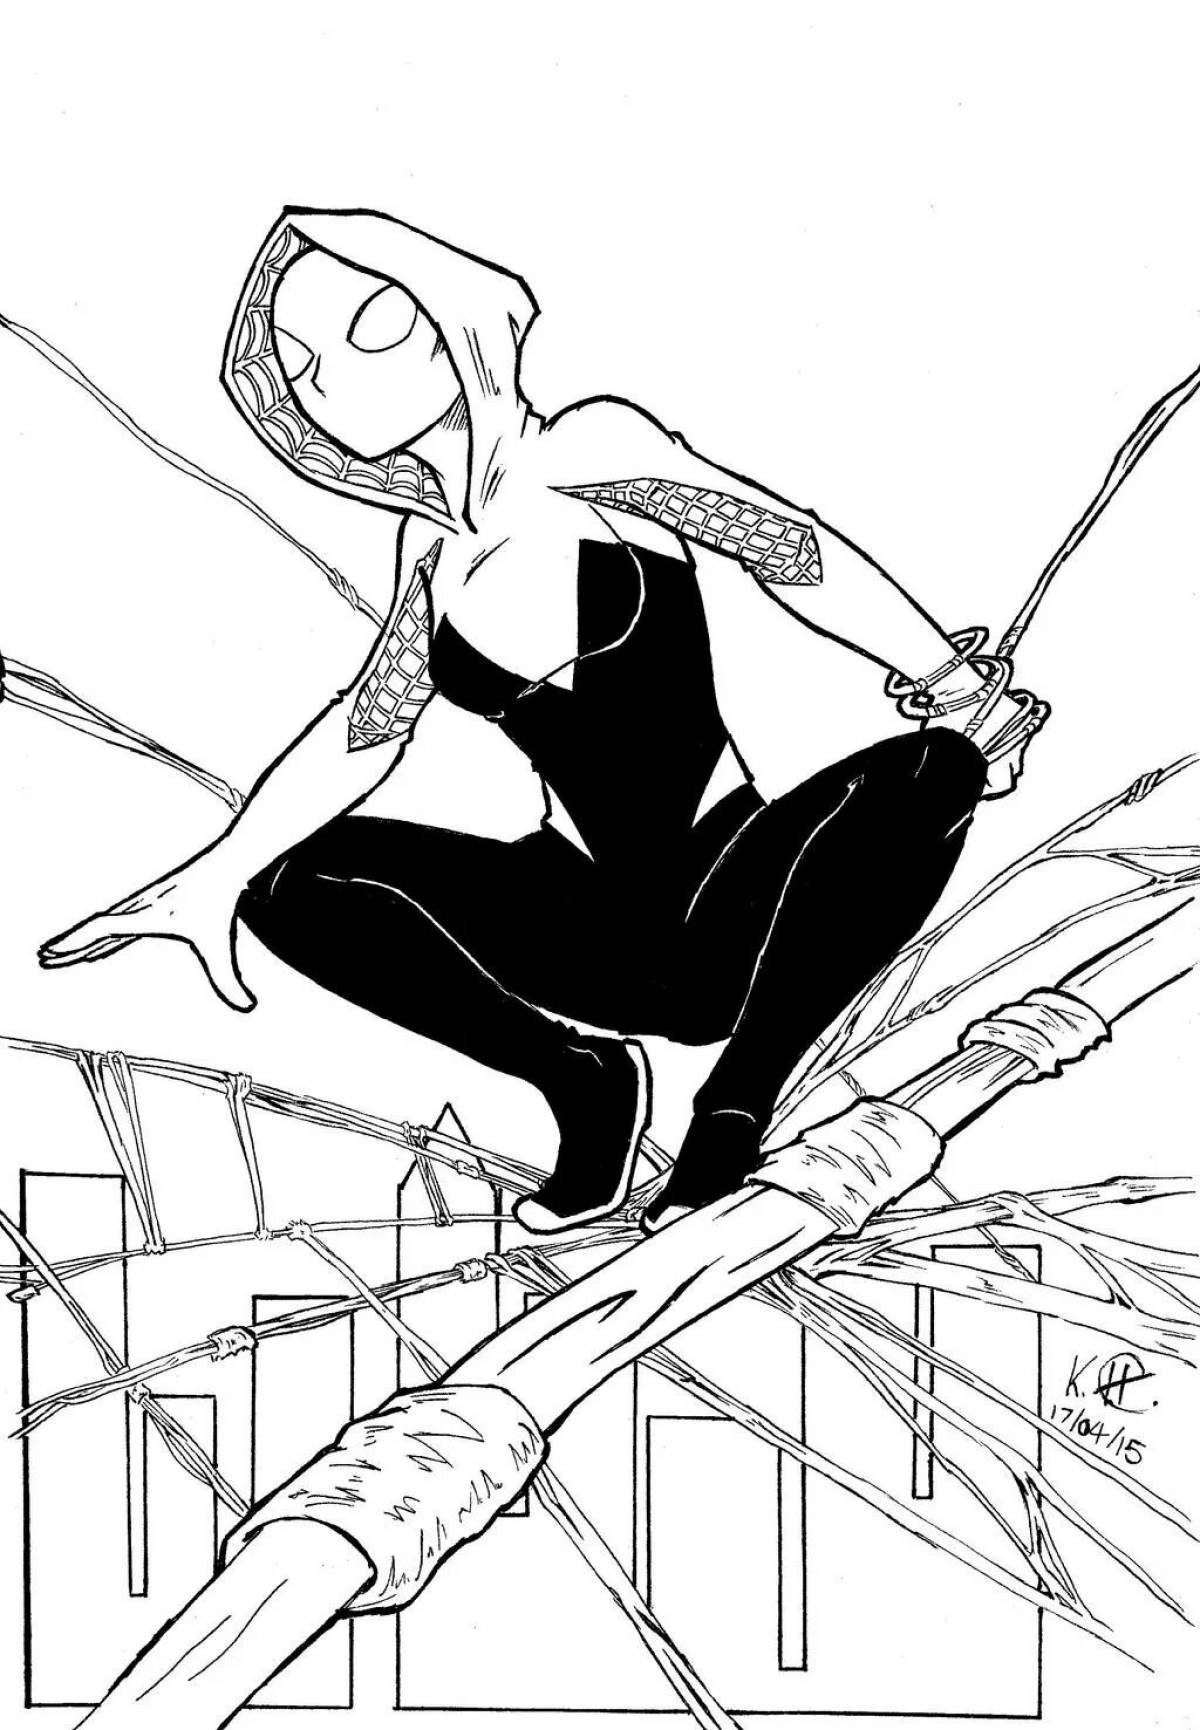 Coloring page nice spider-man